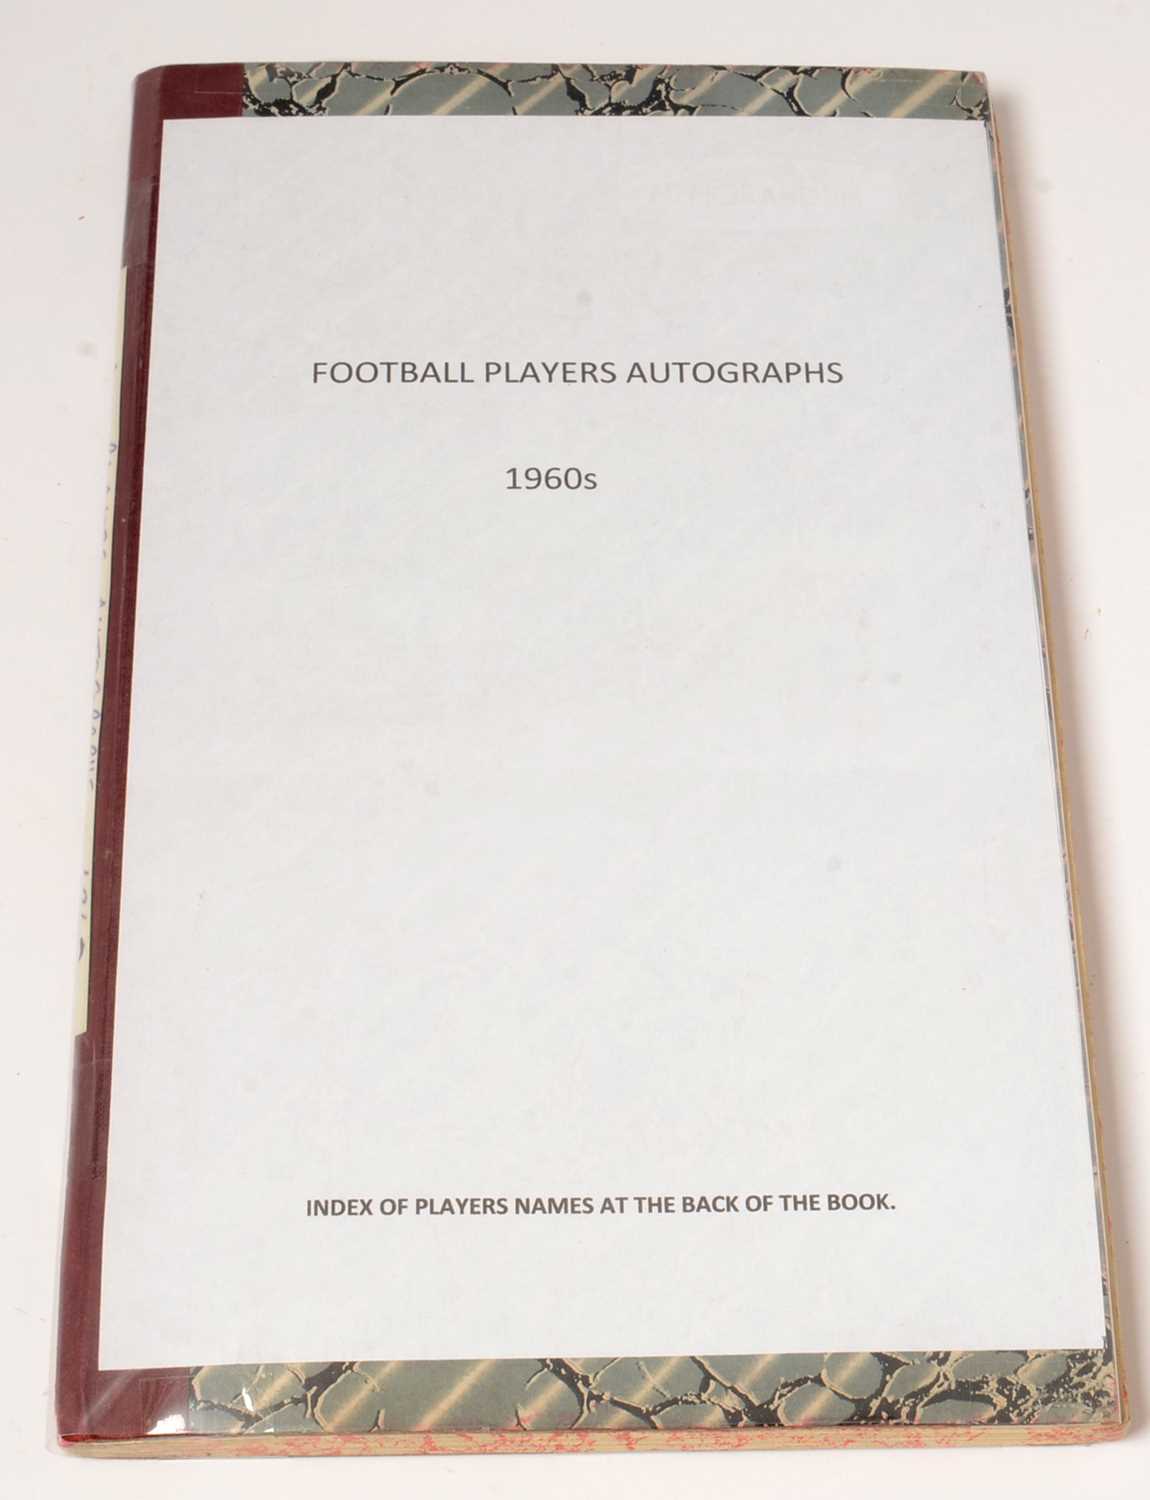 Lot 1250 - Football players autographs from the 1960s